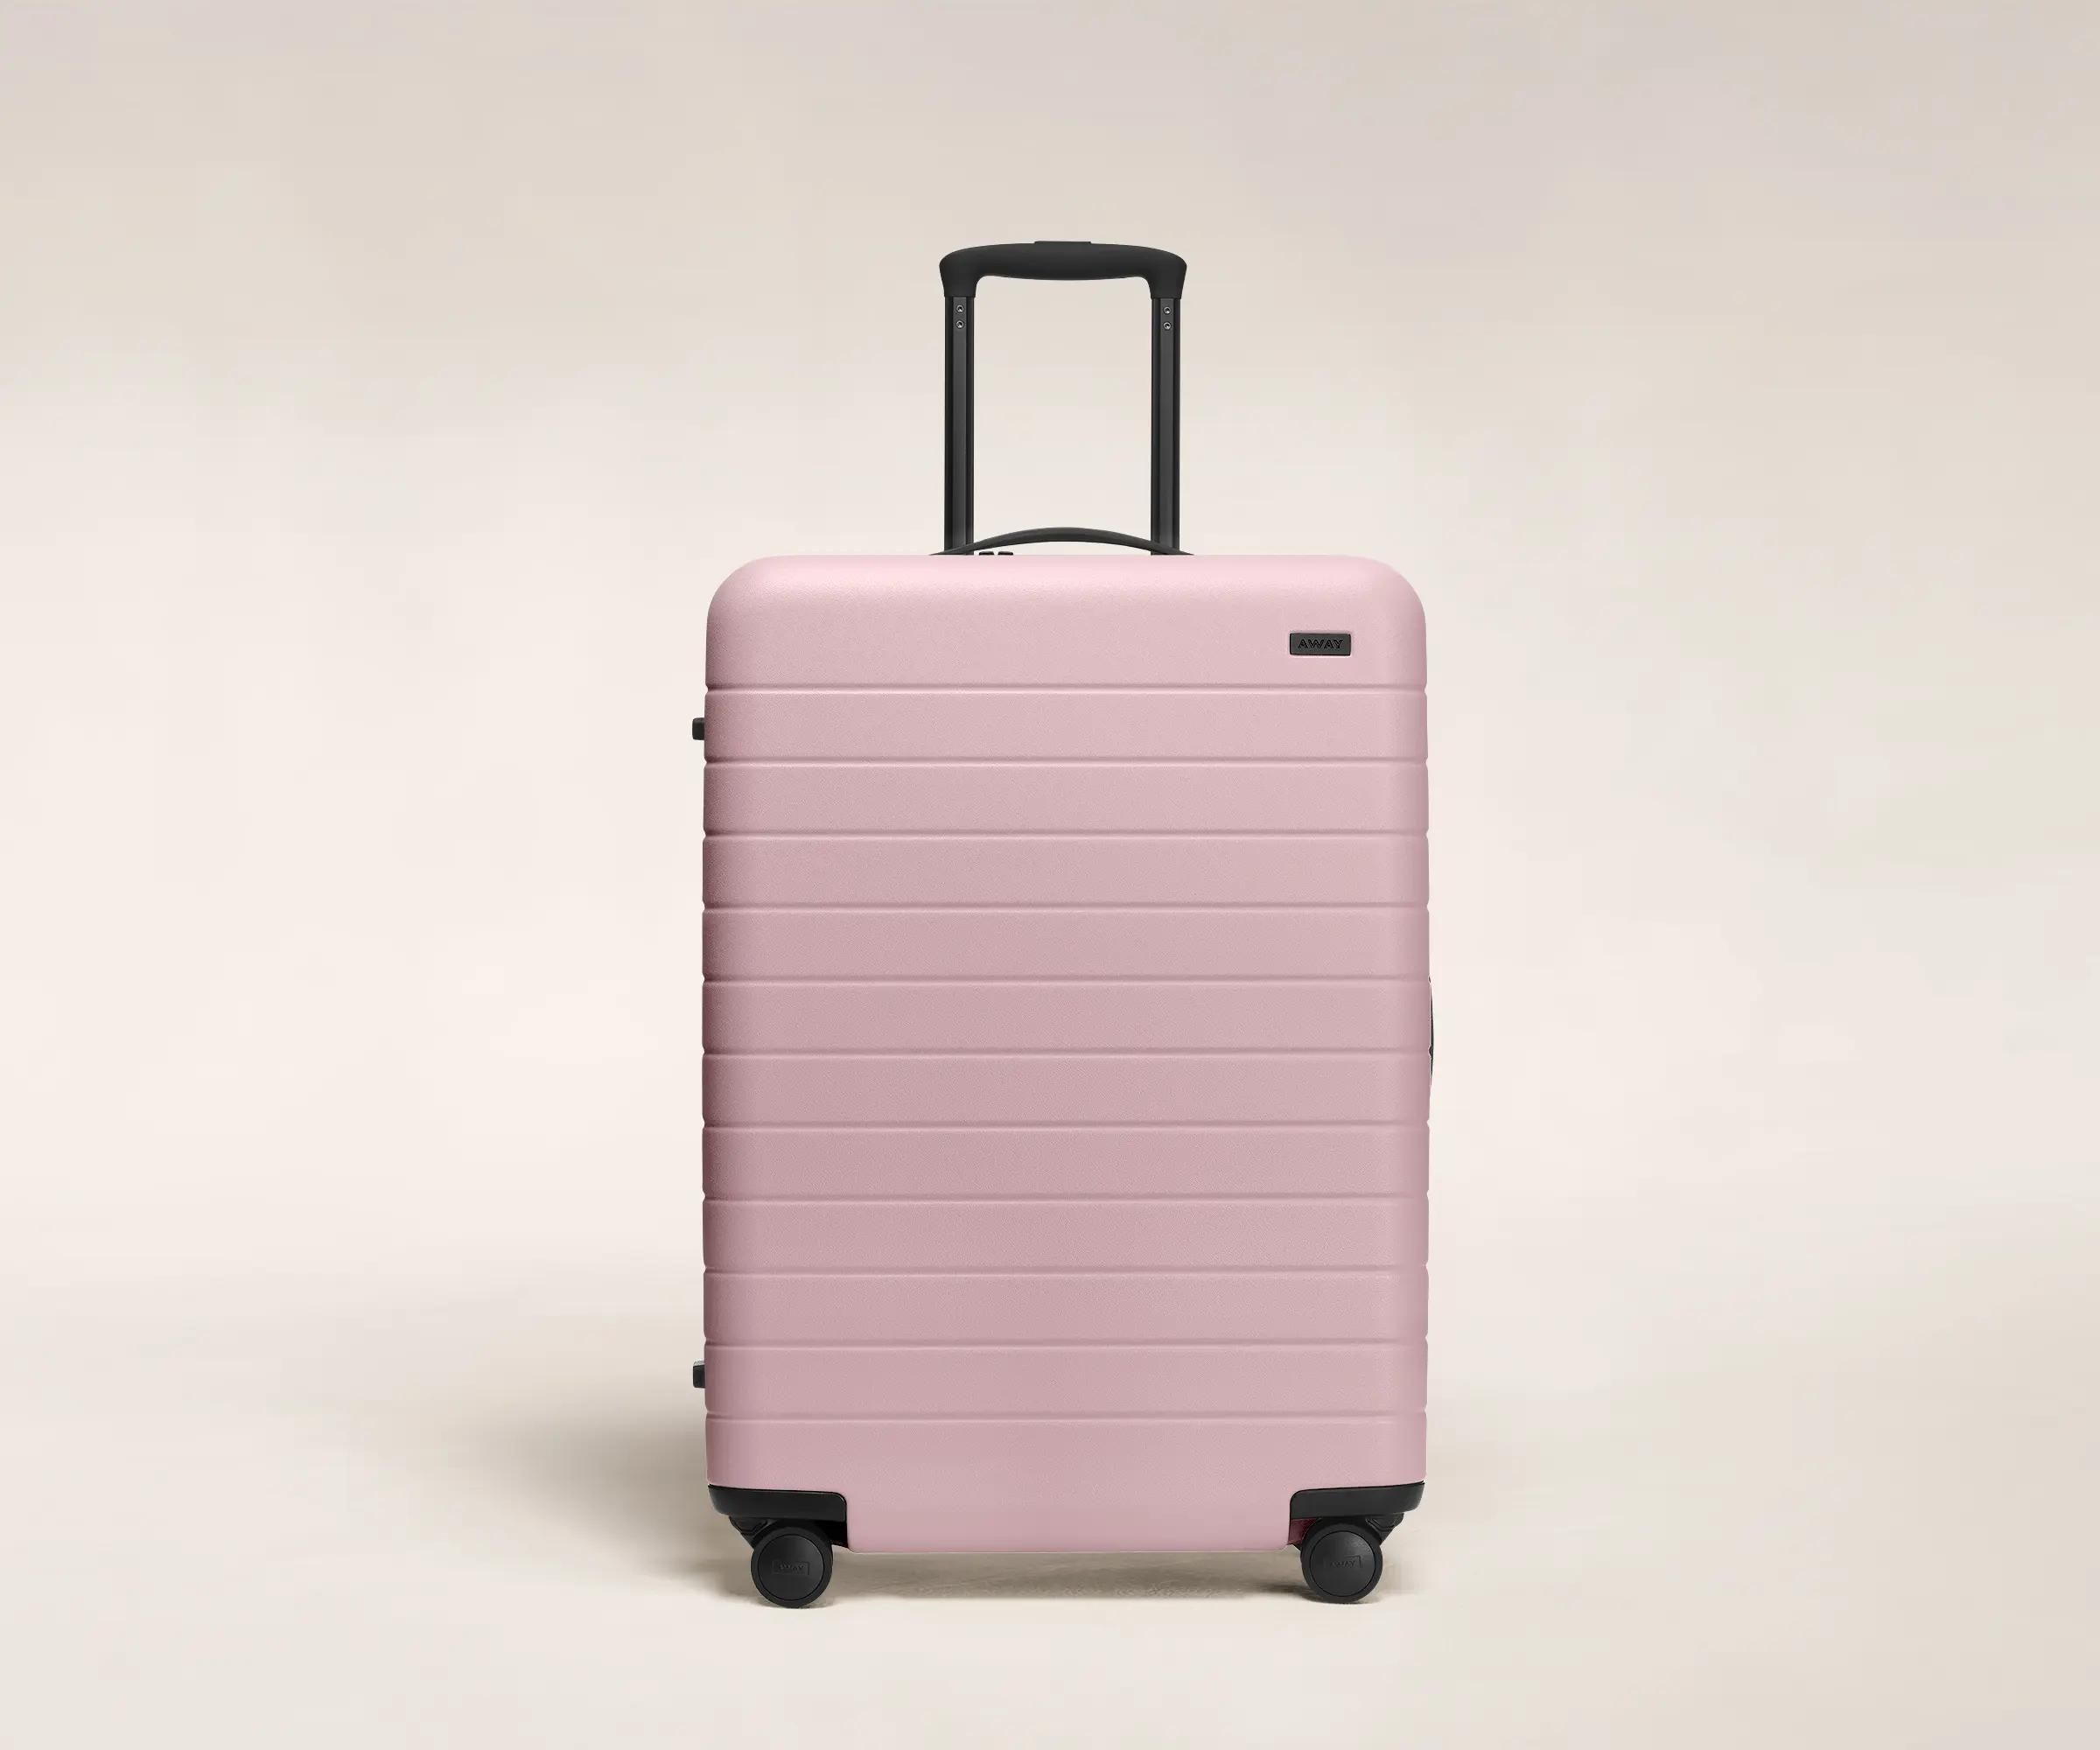 The Best Luggage Sets of 2022, According to Reviews — 9 Best Luggage ...